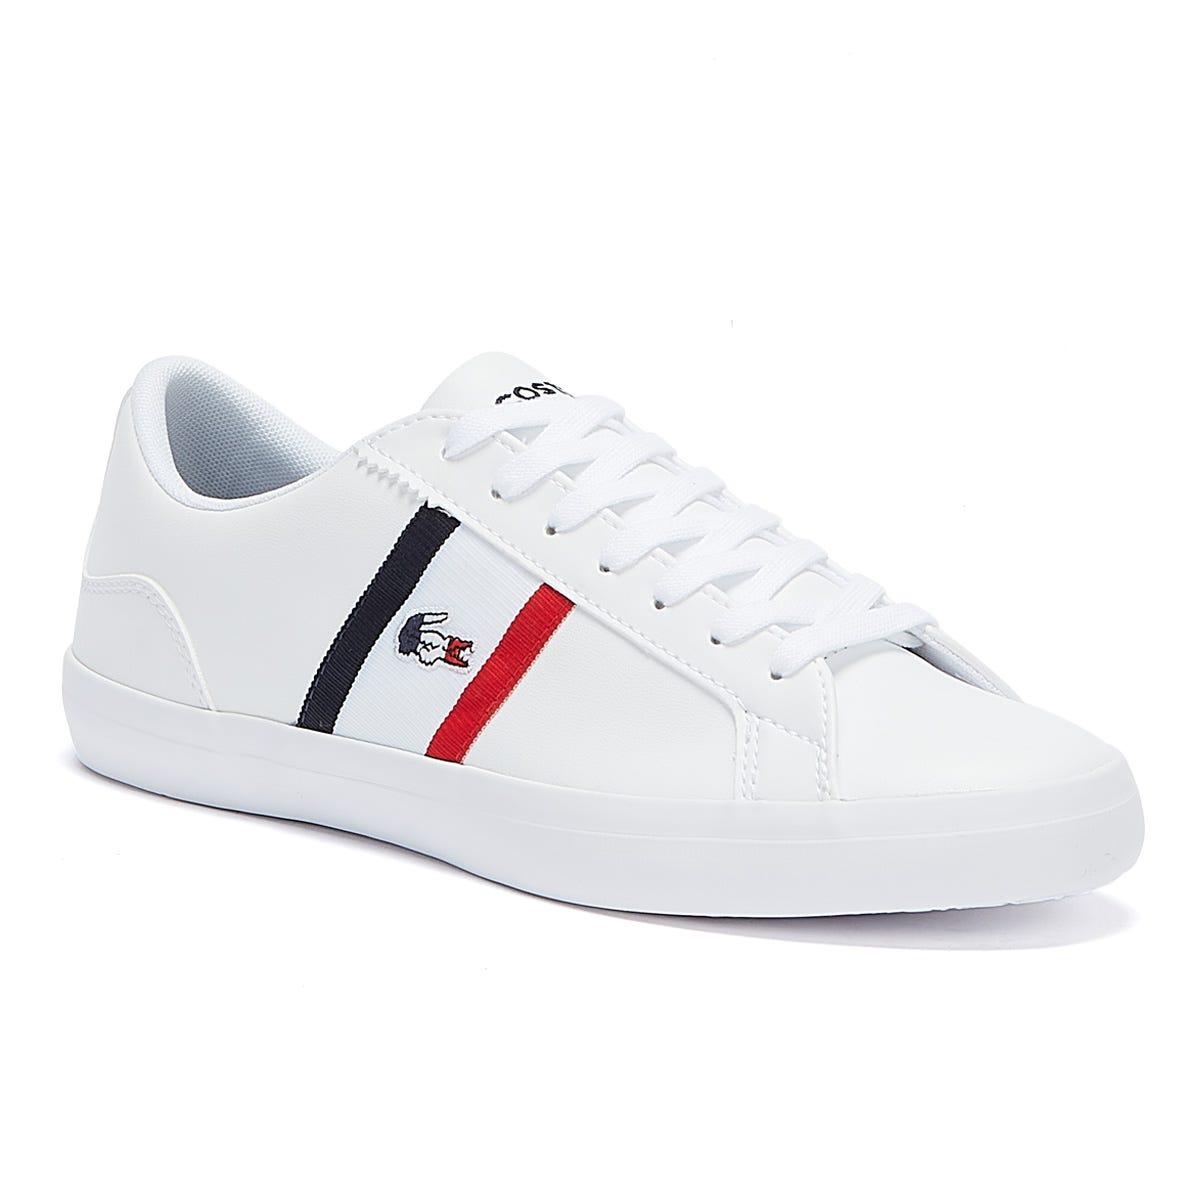 Lacoste Leather Lerond Tri 1 / Navy / Red Trainers in White for Men - Lyst